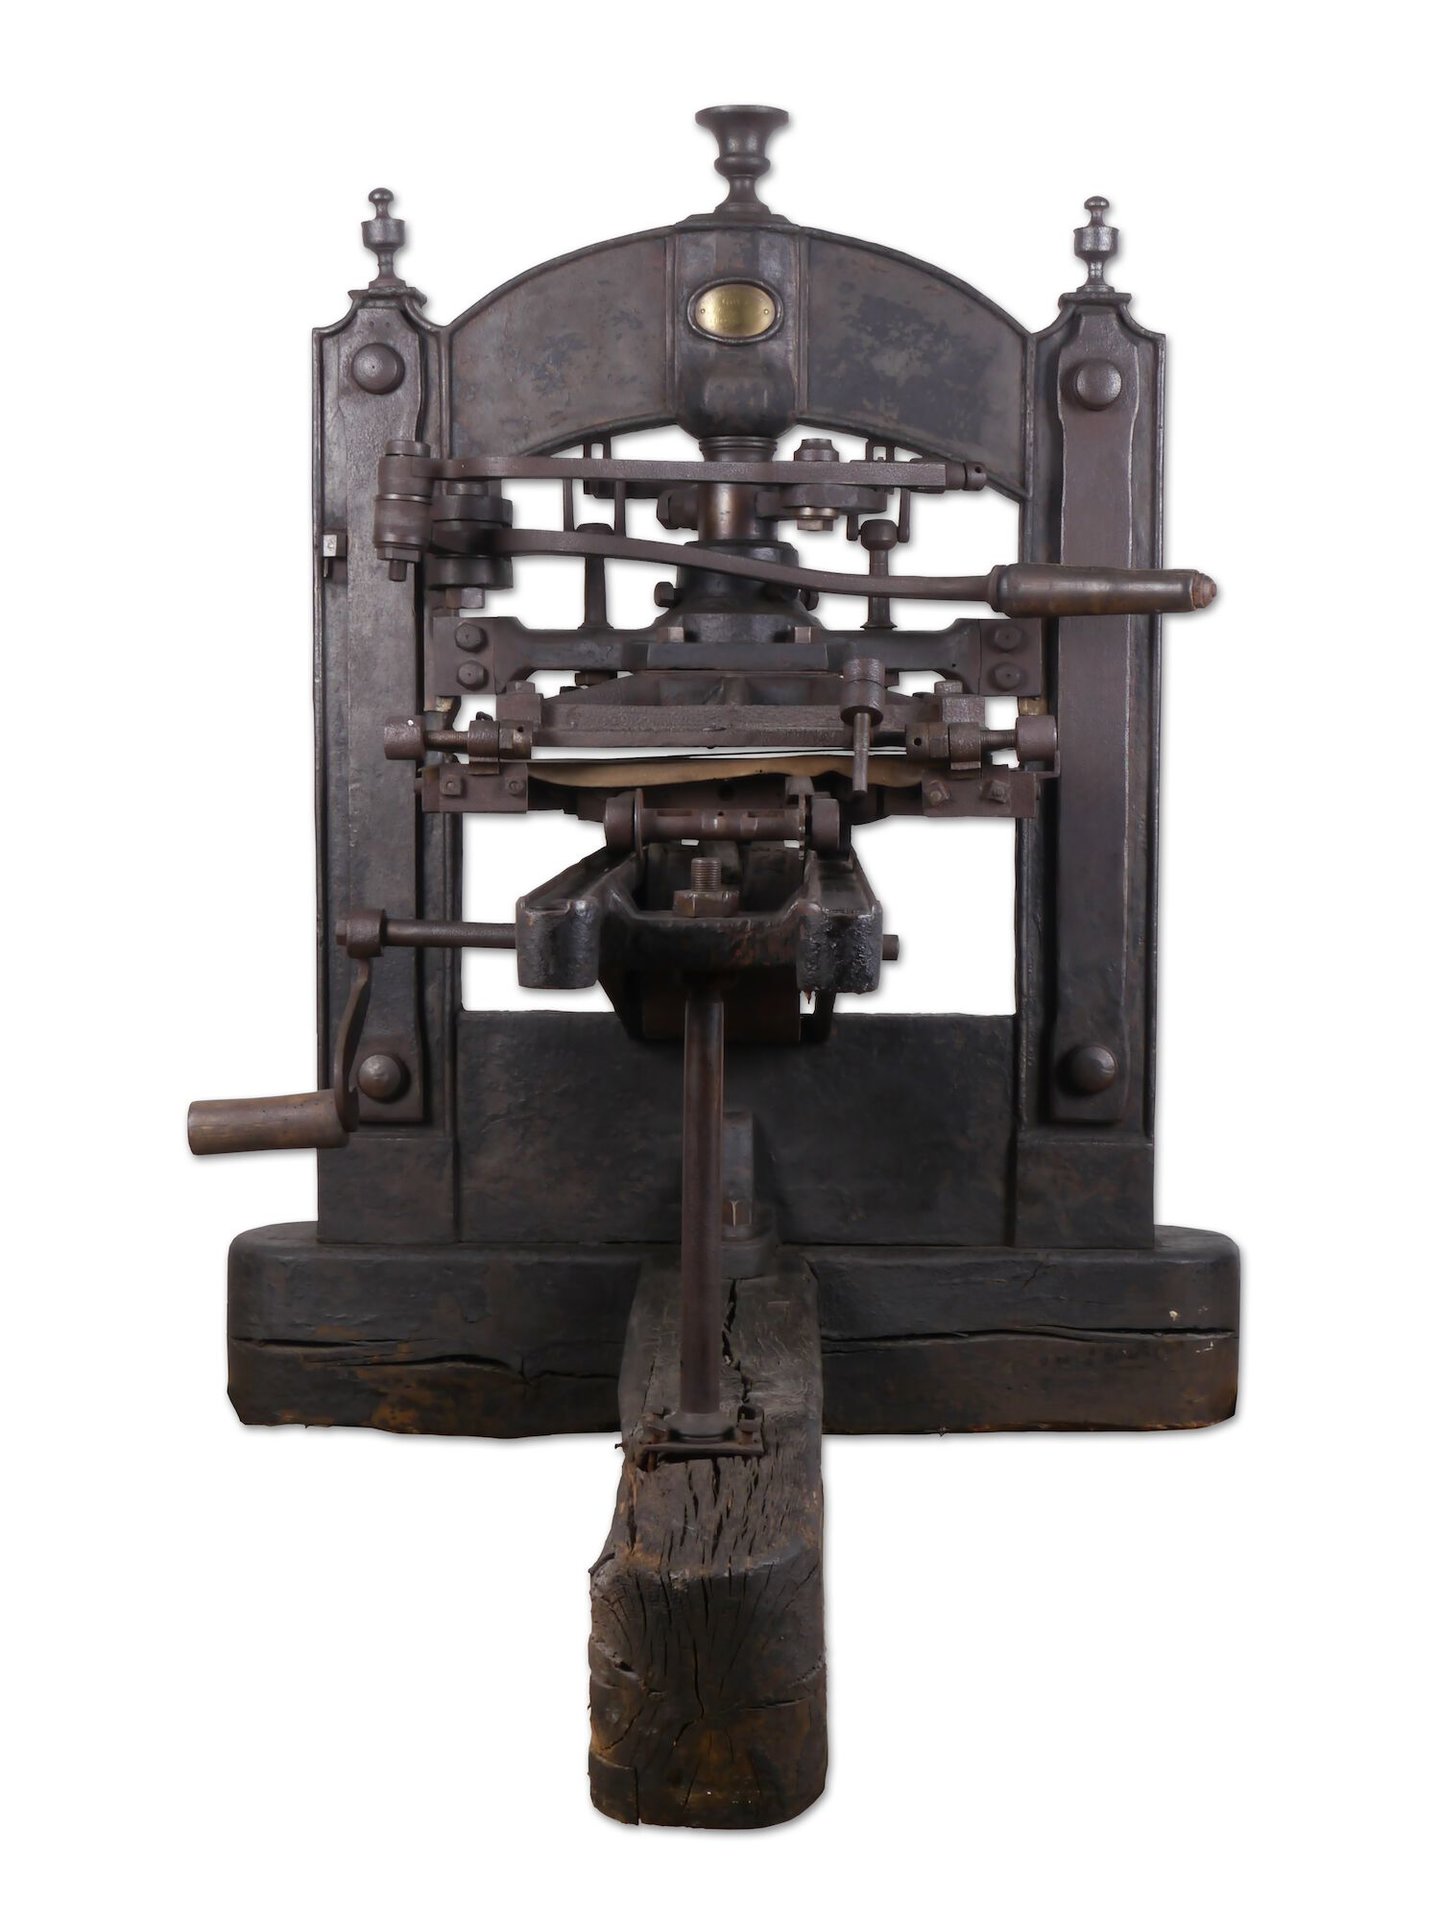 Printing press in cast iron produced by Gouvy